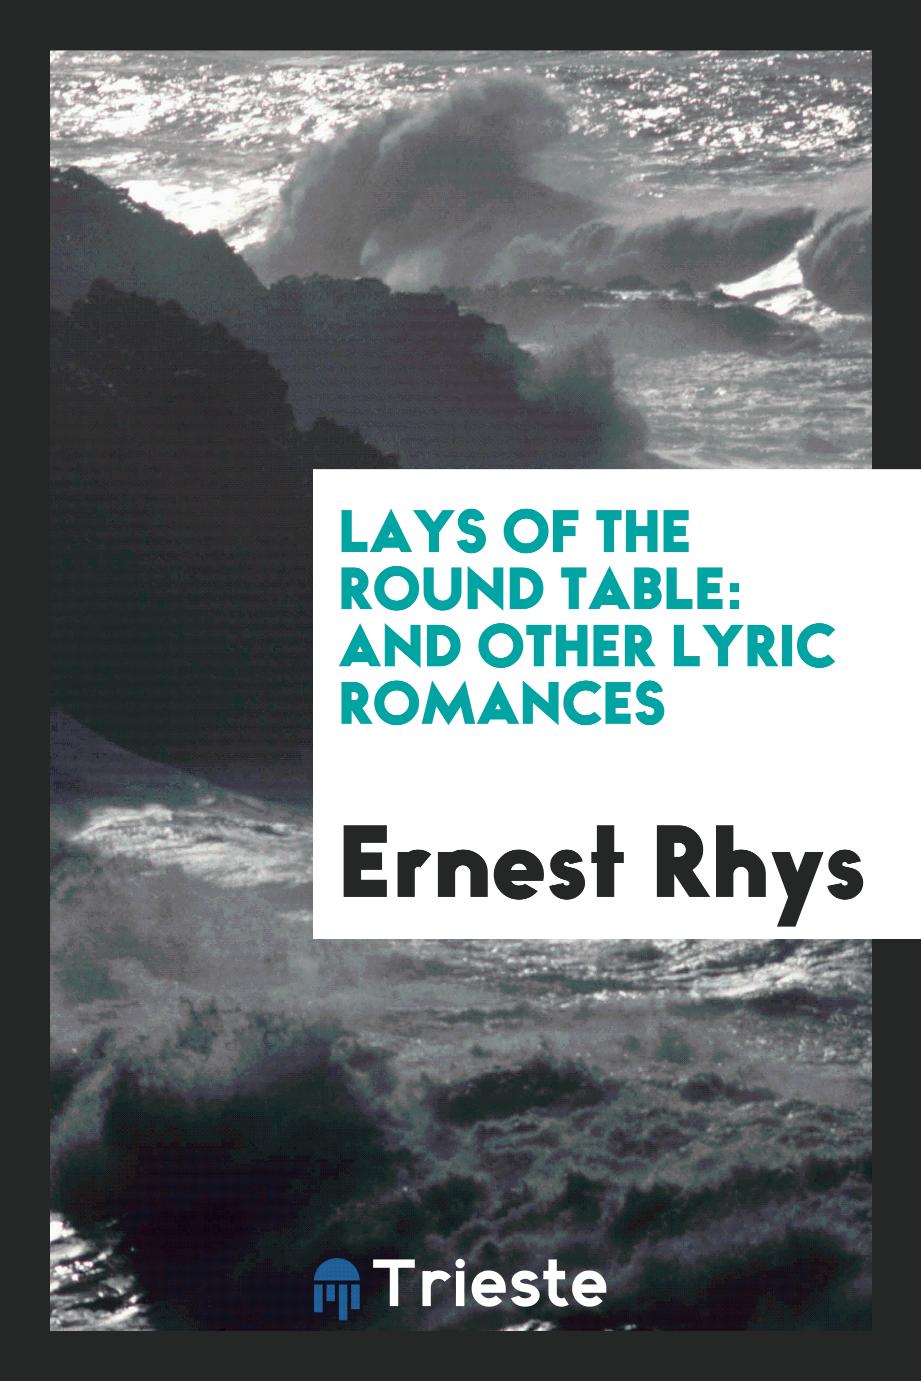 Lays of the Round Table: And Other Lyric Romances